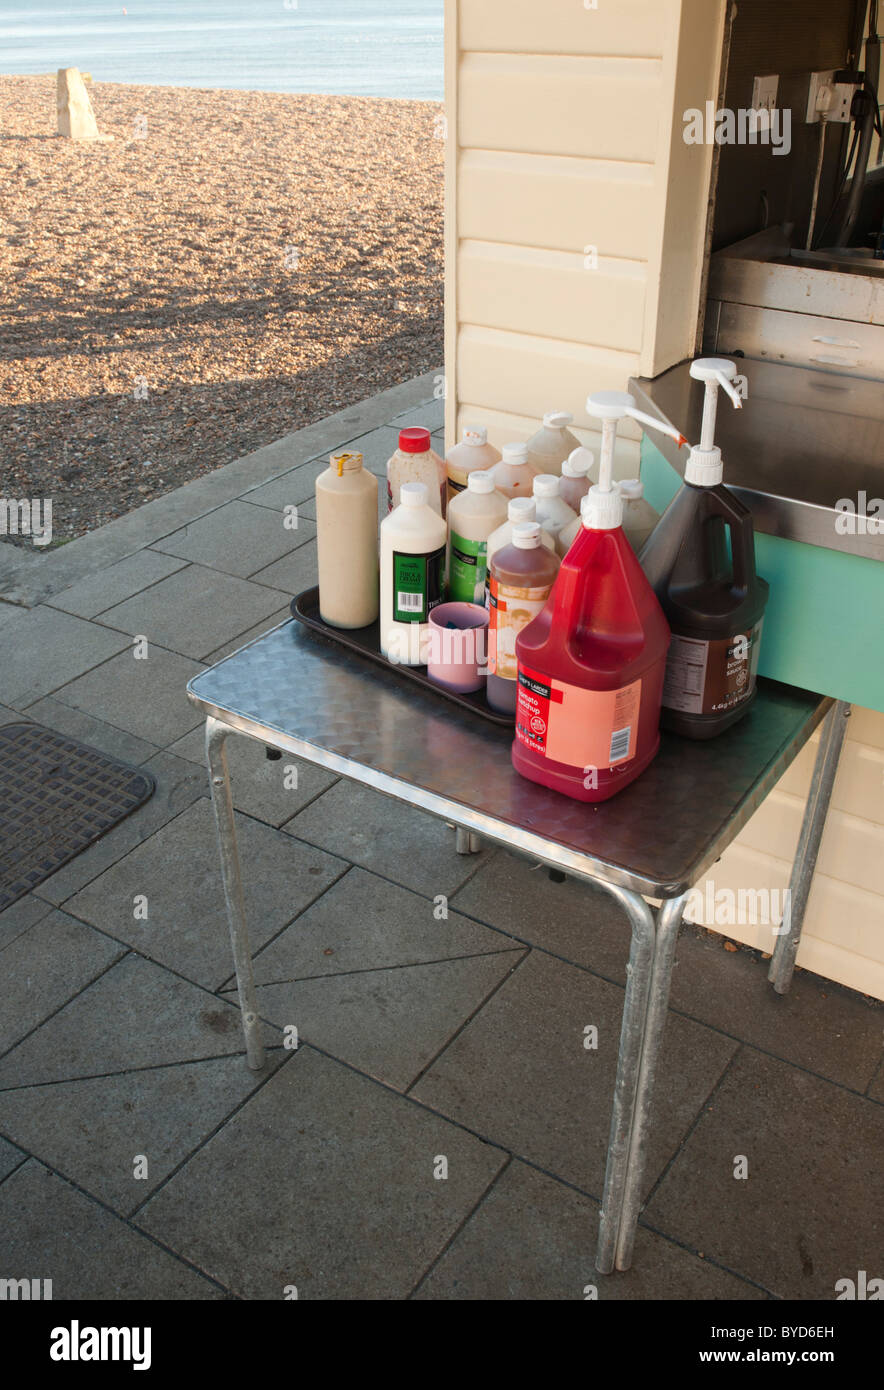 Seaside fish and chip kiosk, a table laden with sauce bottles, the beach and sea in the background. Stock Photo